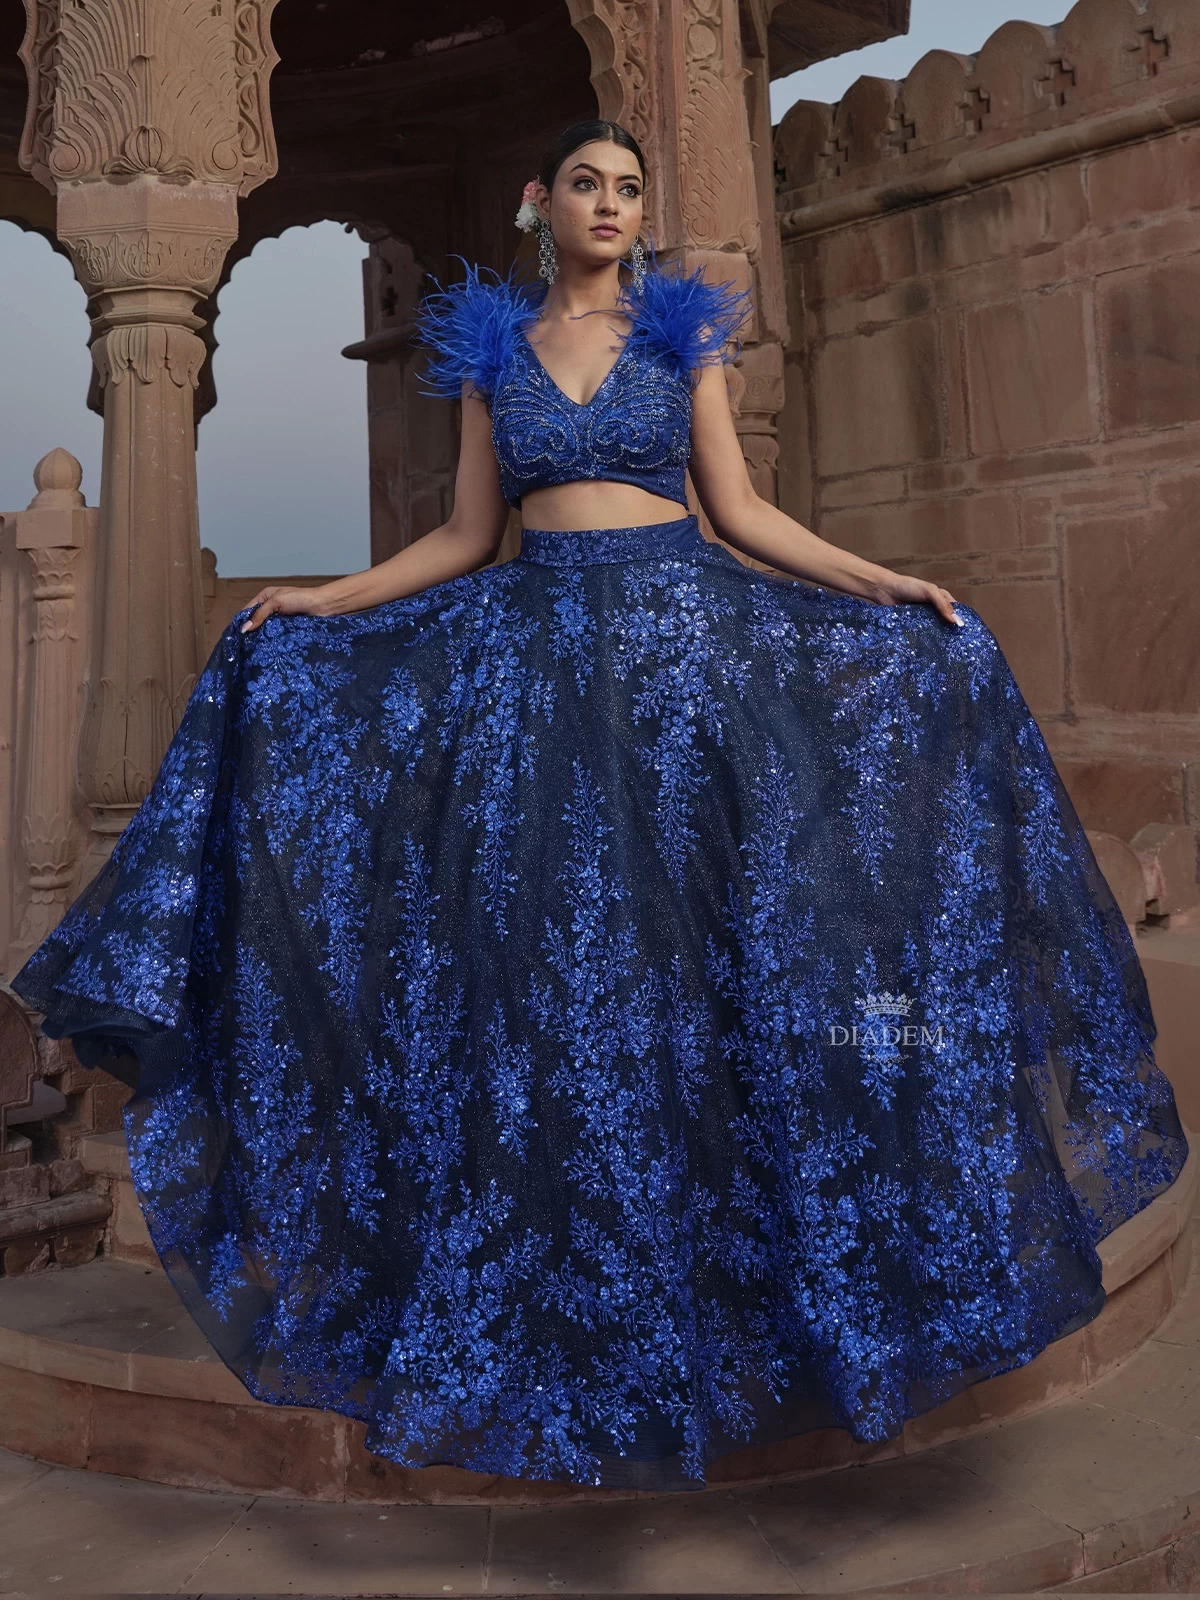 Royal Blue Net Lehenga With Floral Sequin Embellishments And Sleeveless With Feathers